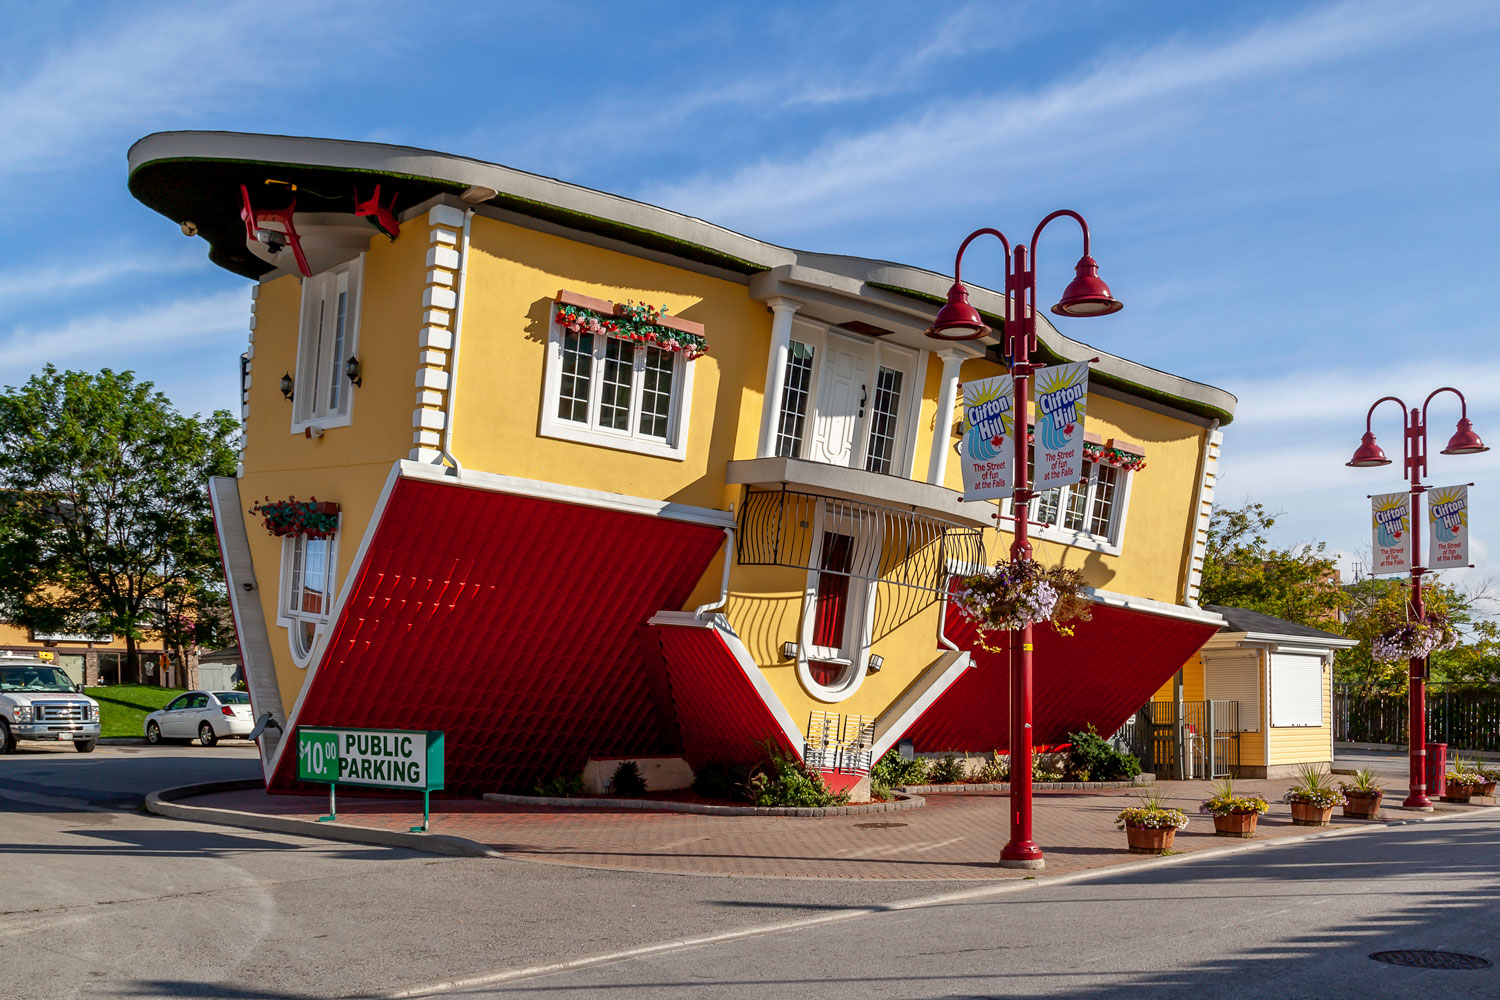 An awesome looking upside down house, 11 Crazy Upside Down Houses You Won't Believe Are Real!